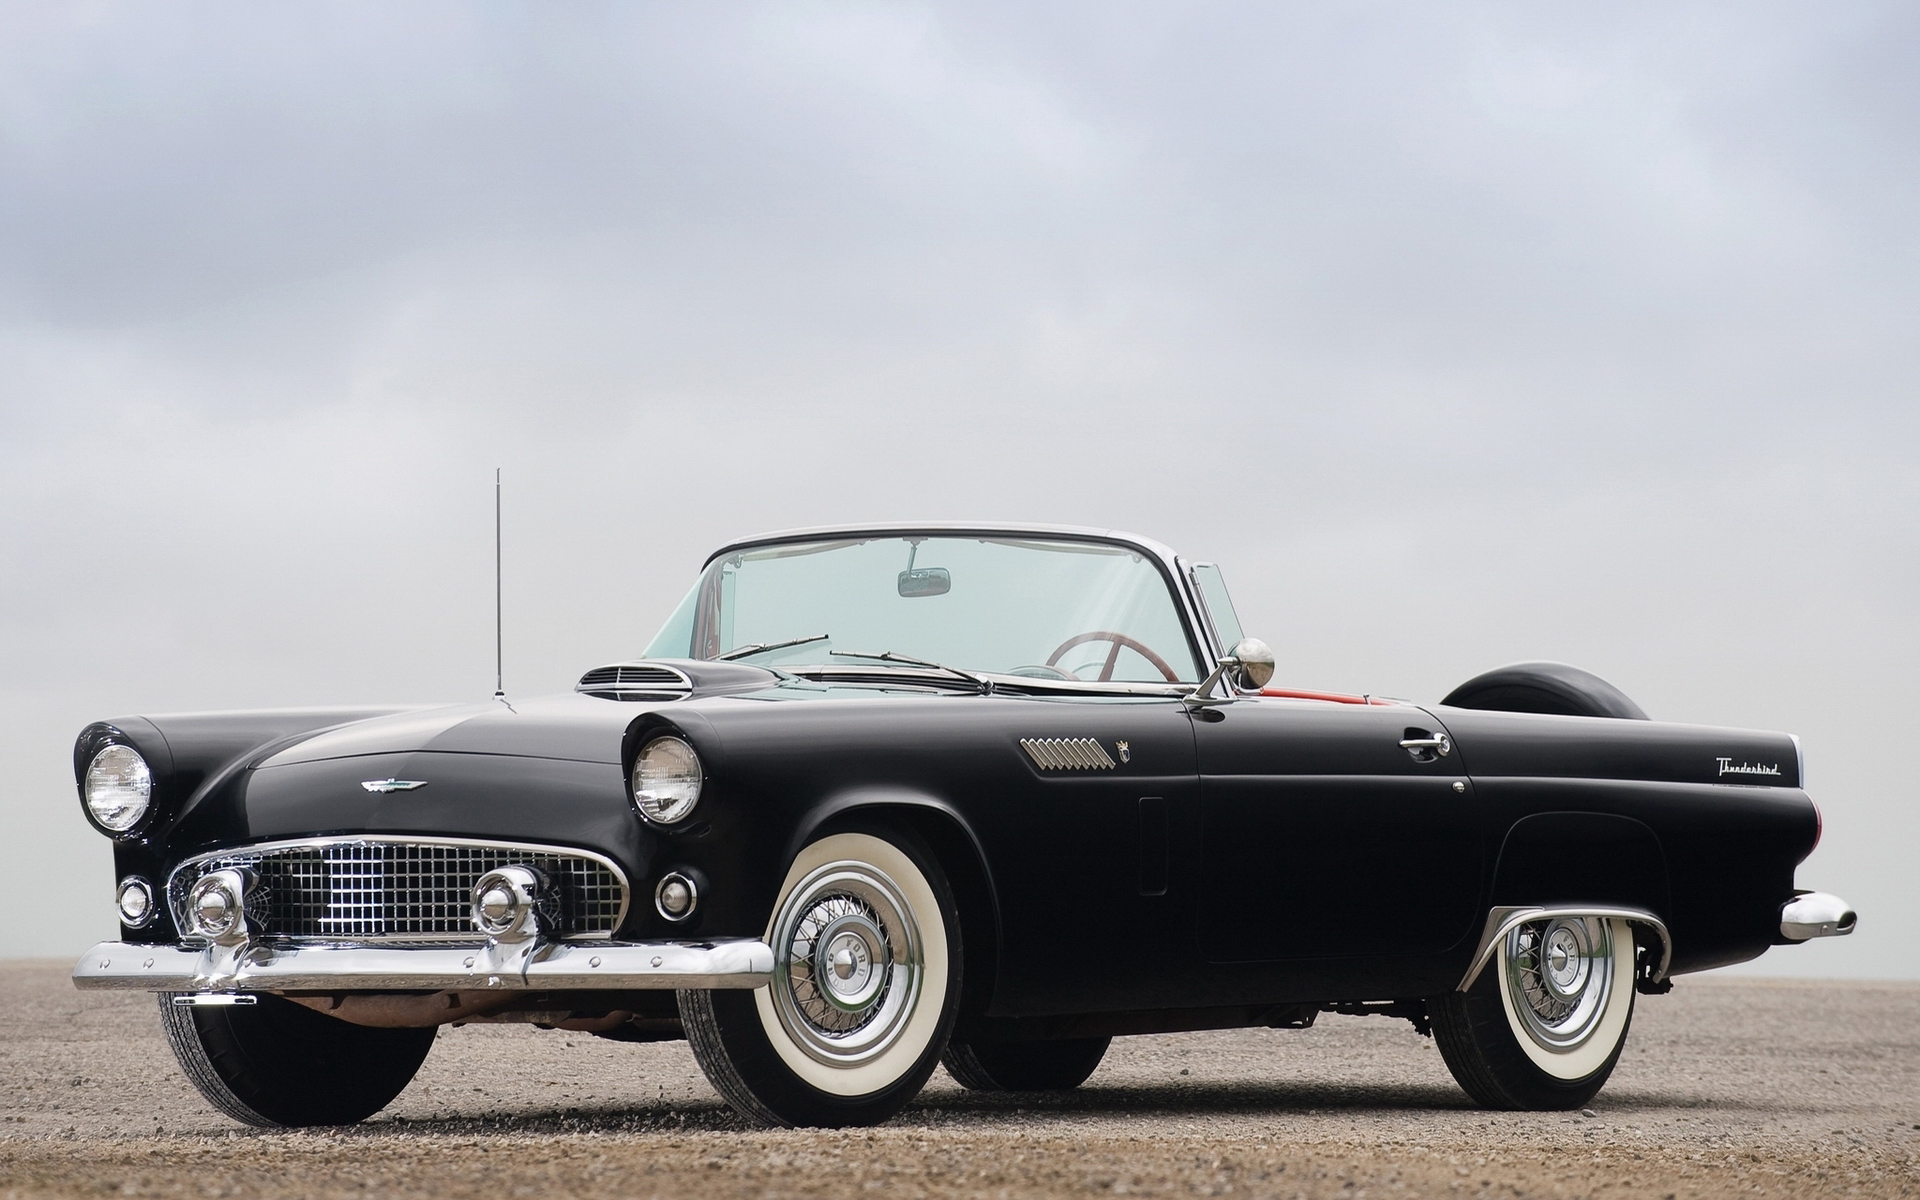 Ford Thunderbird HD Wallpaper. Background Image